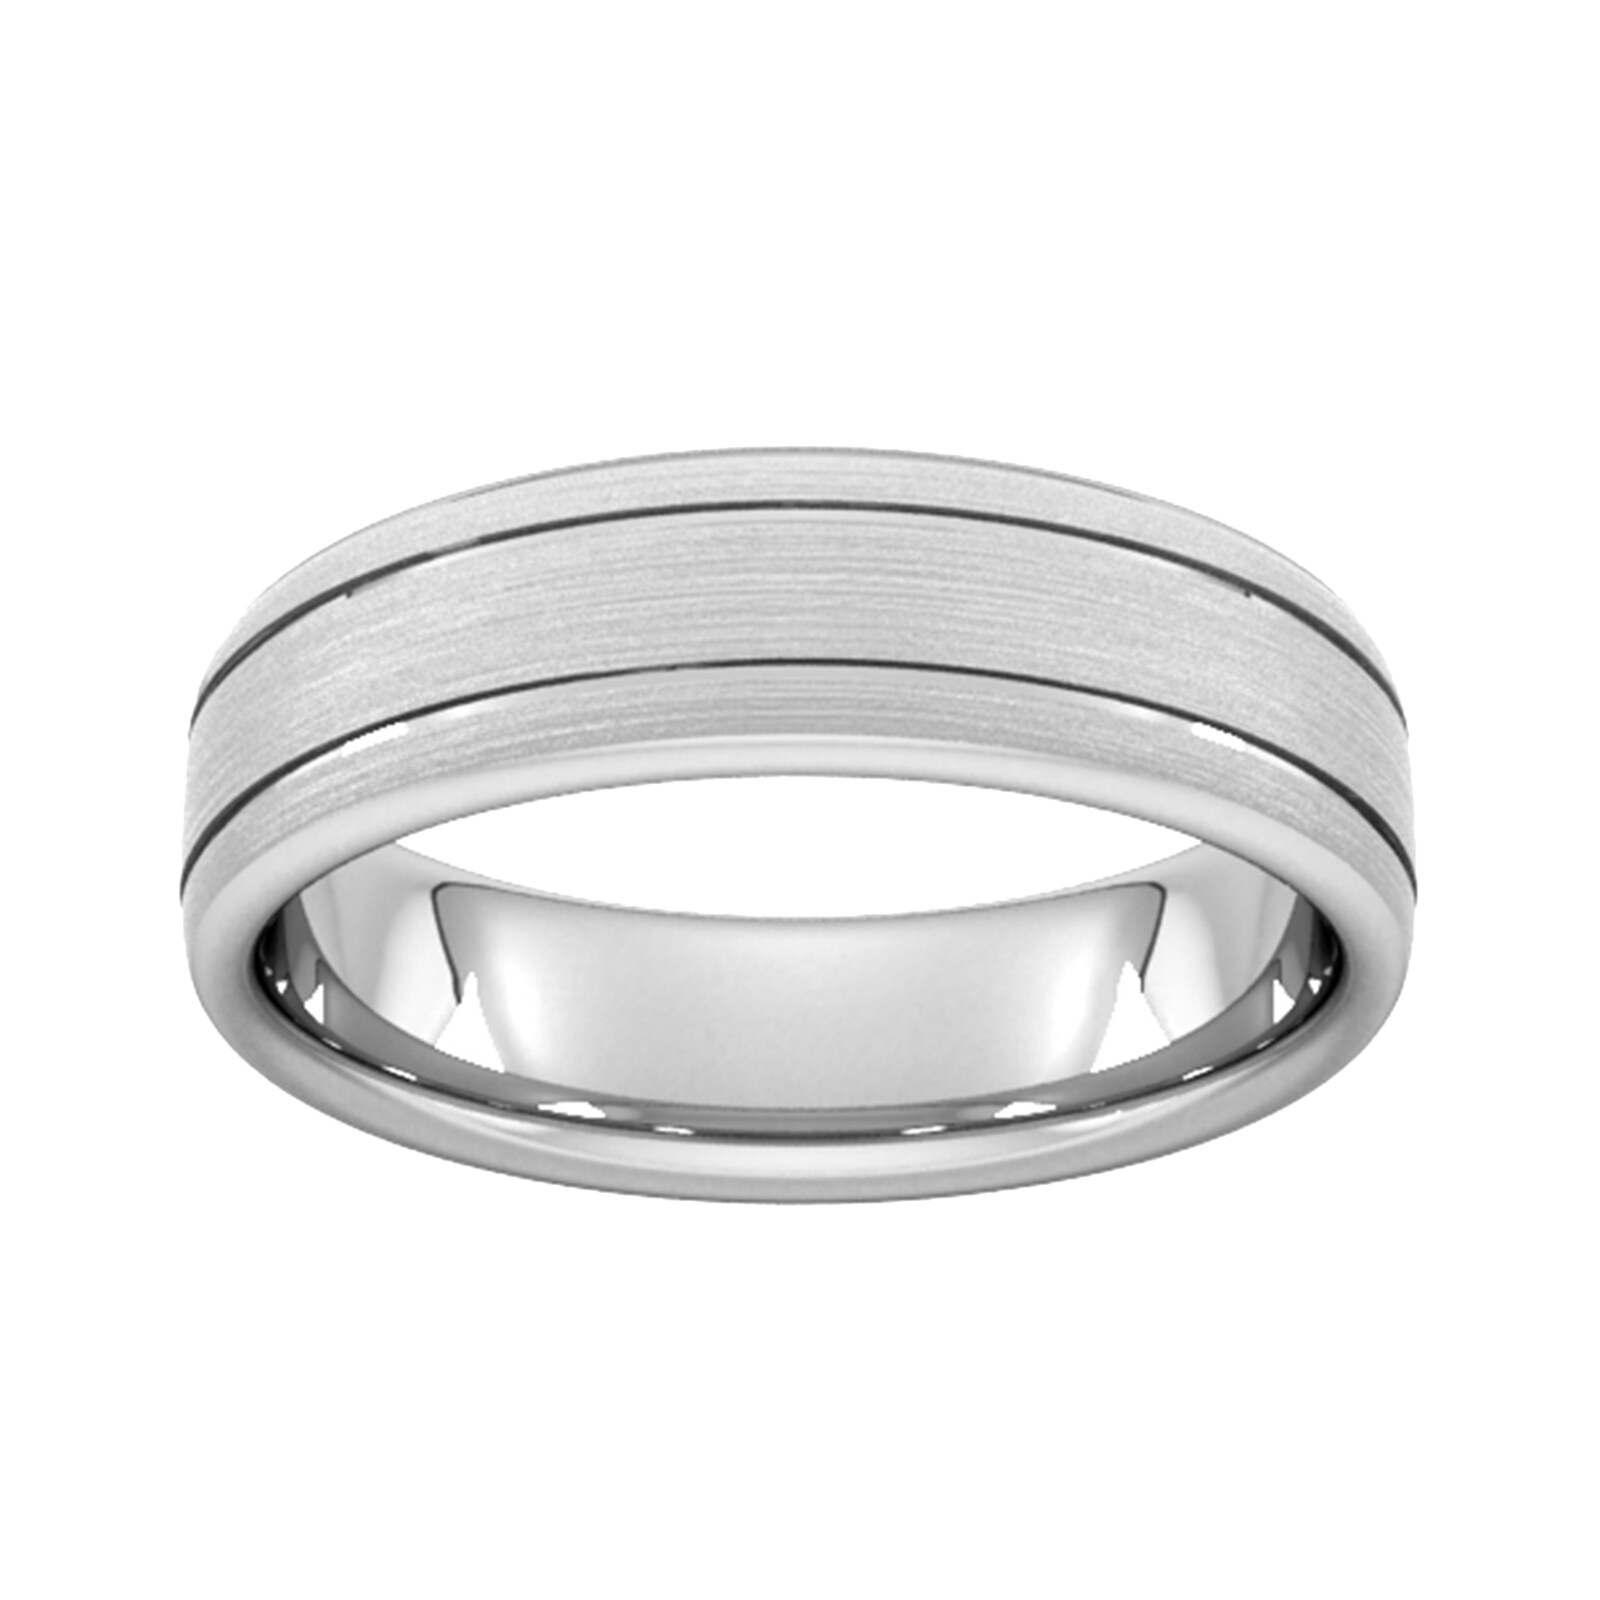 6mm Traditional Court Standard Matt Finish With Double Grooves Wedding Ring In 9 Carat White Gold - Ring Size K